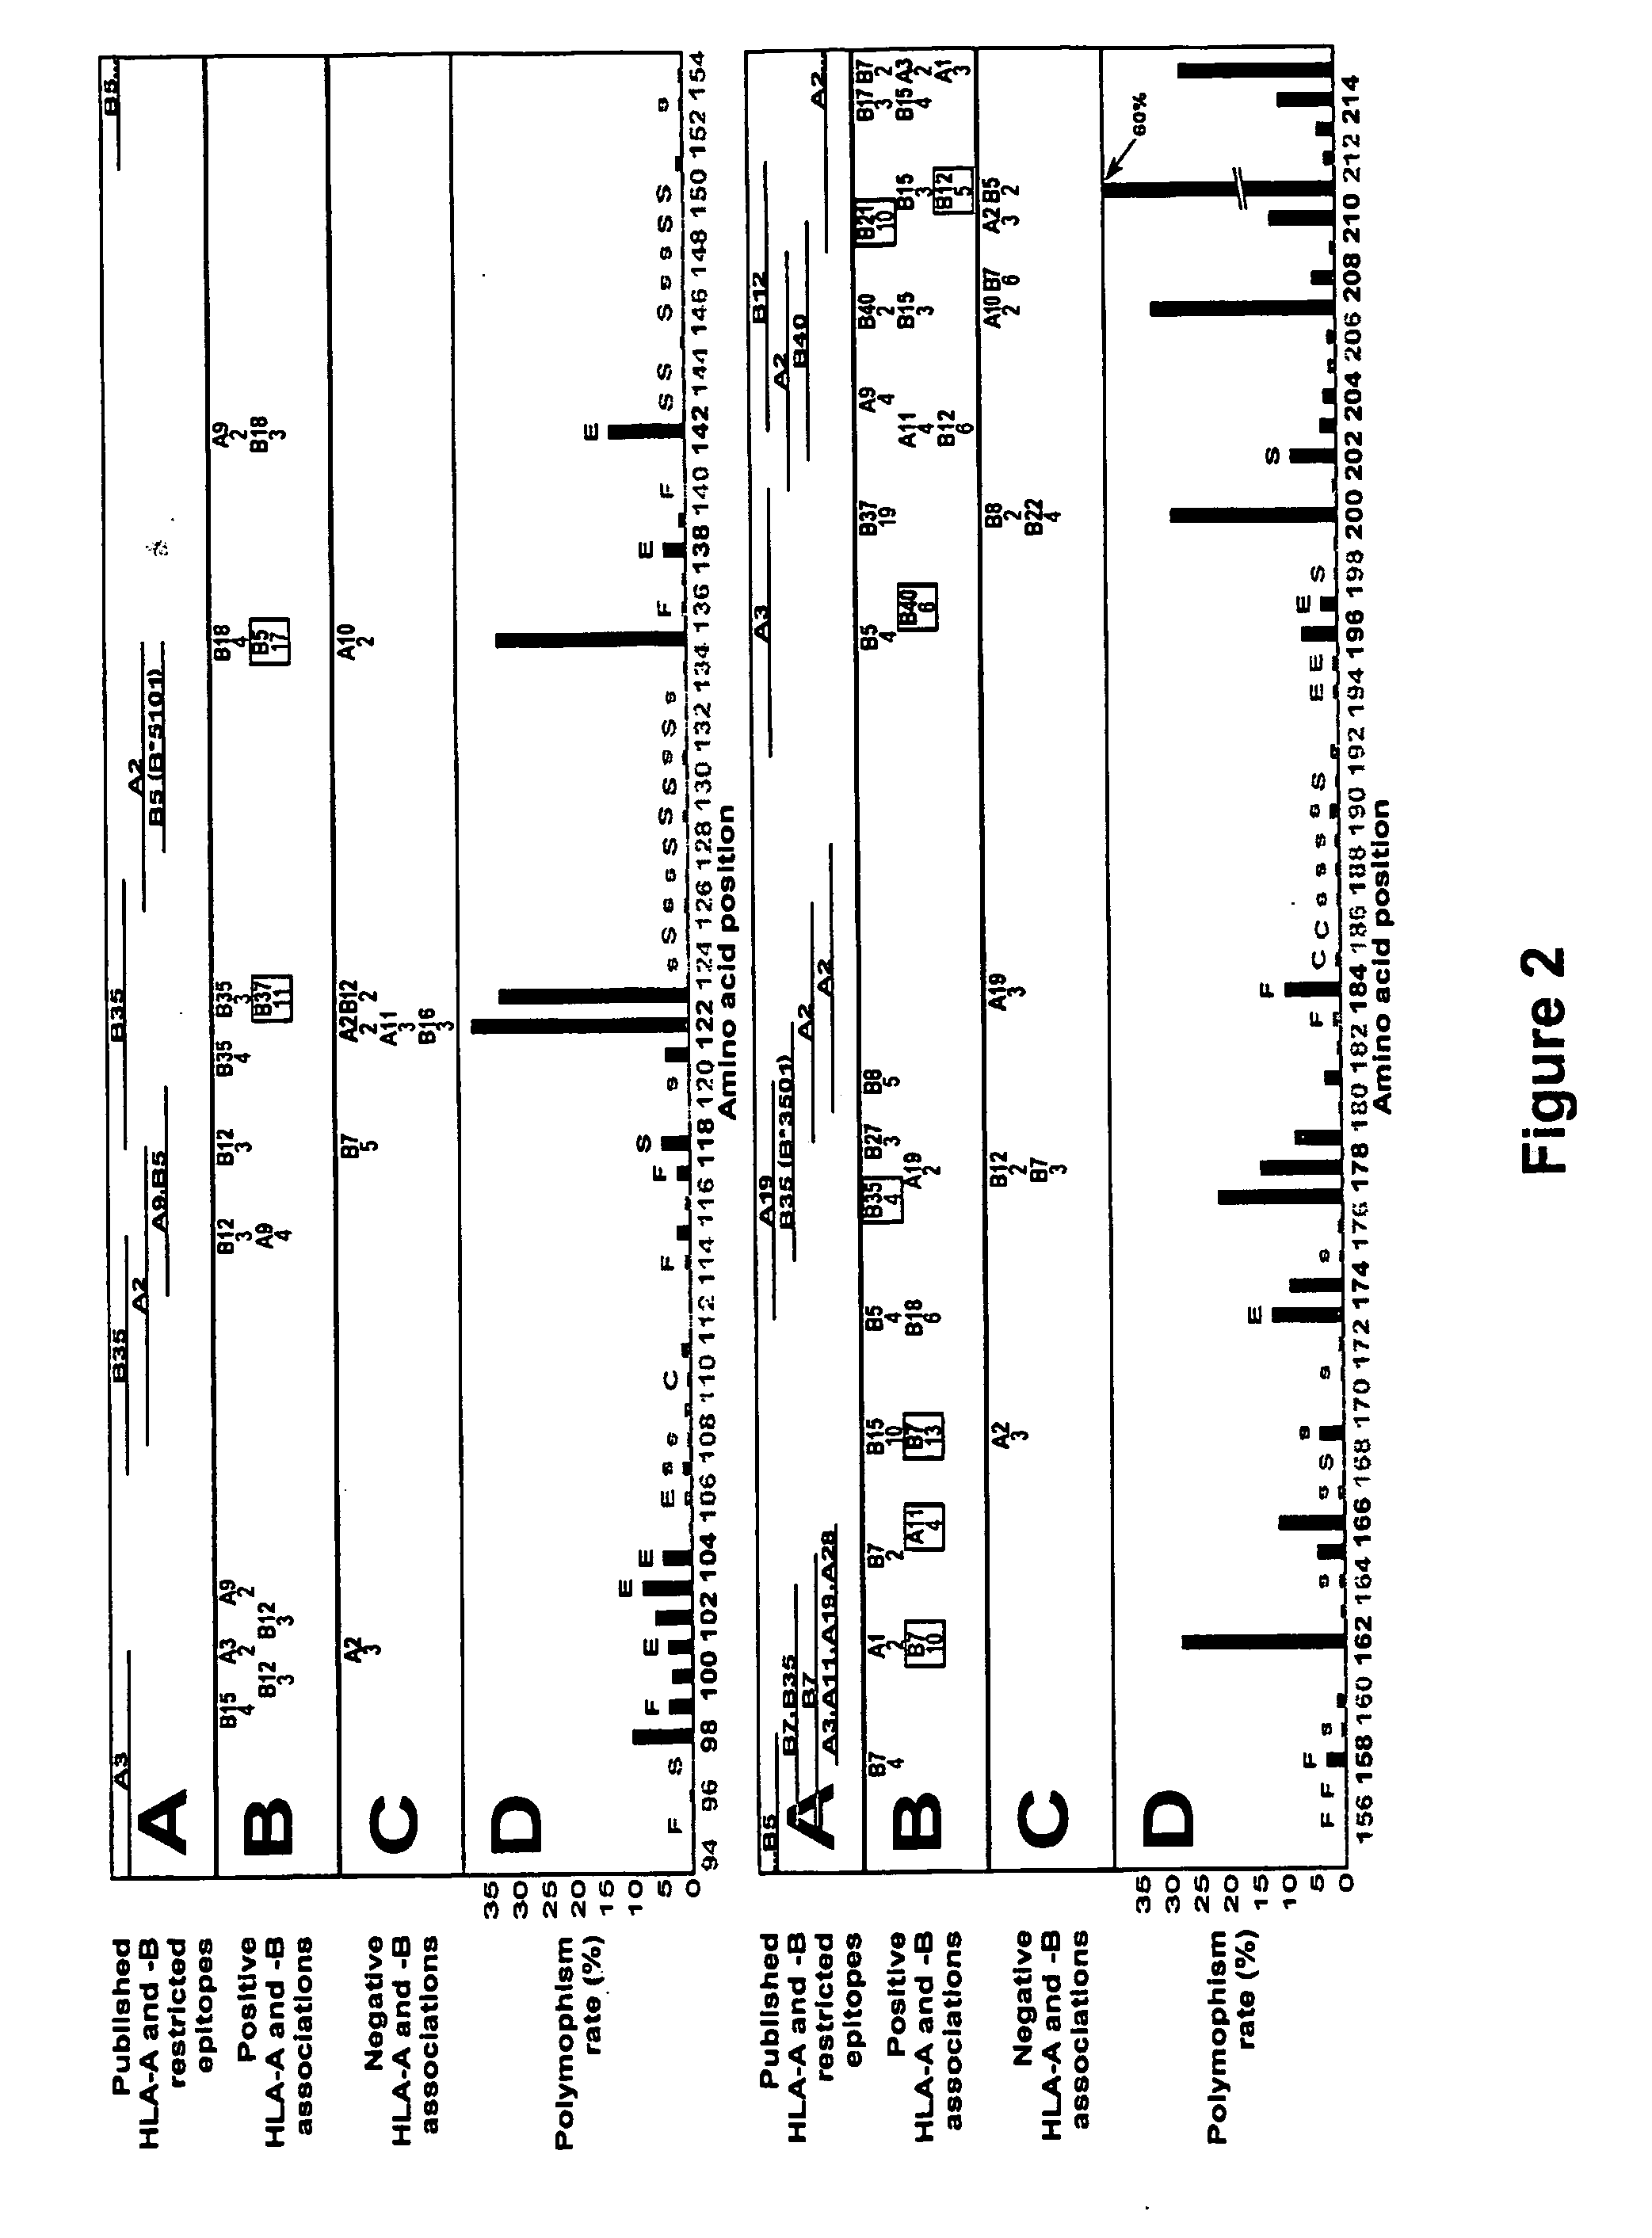 Method for identification and development of therapeutic agents